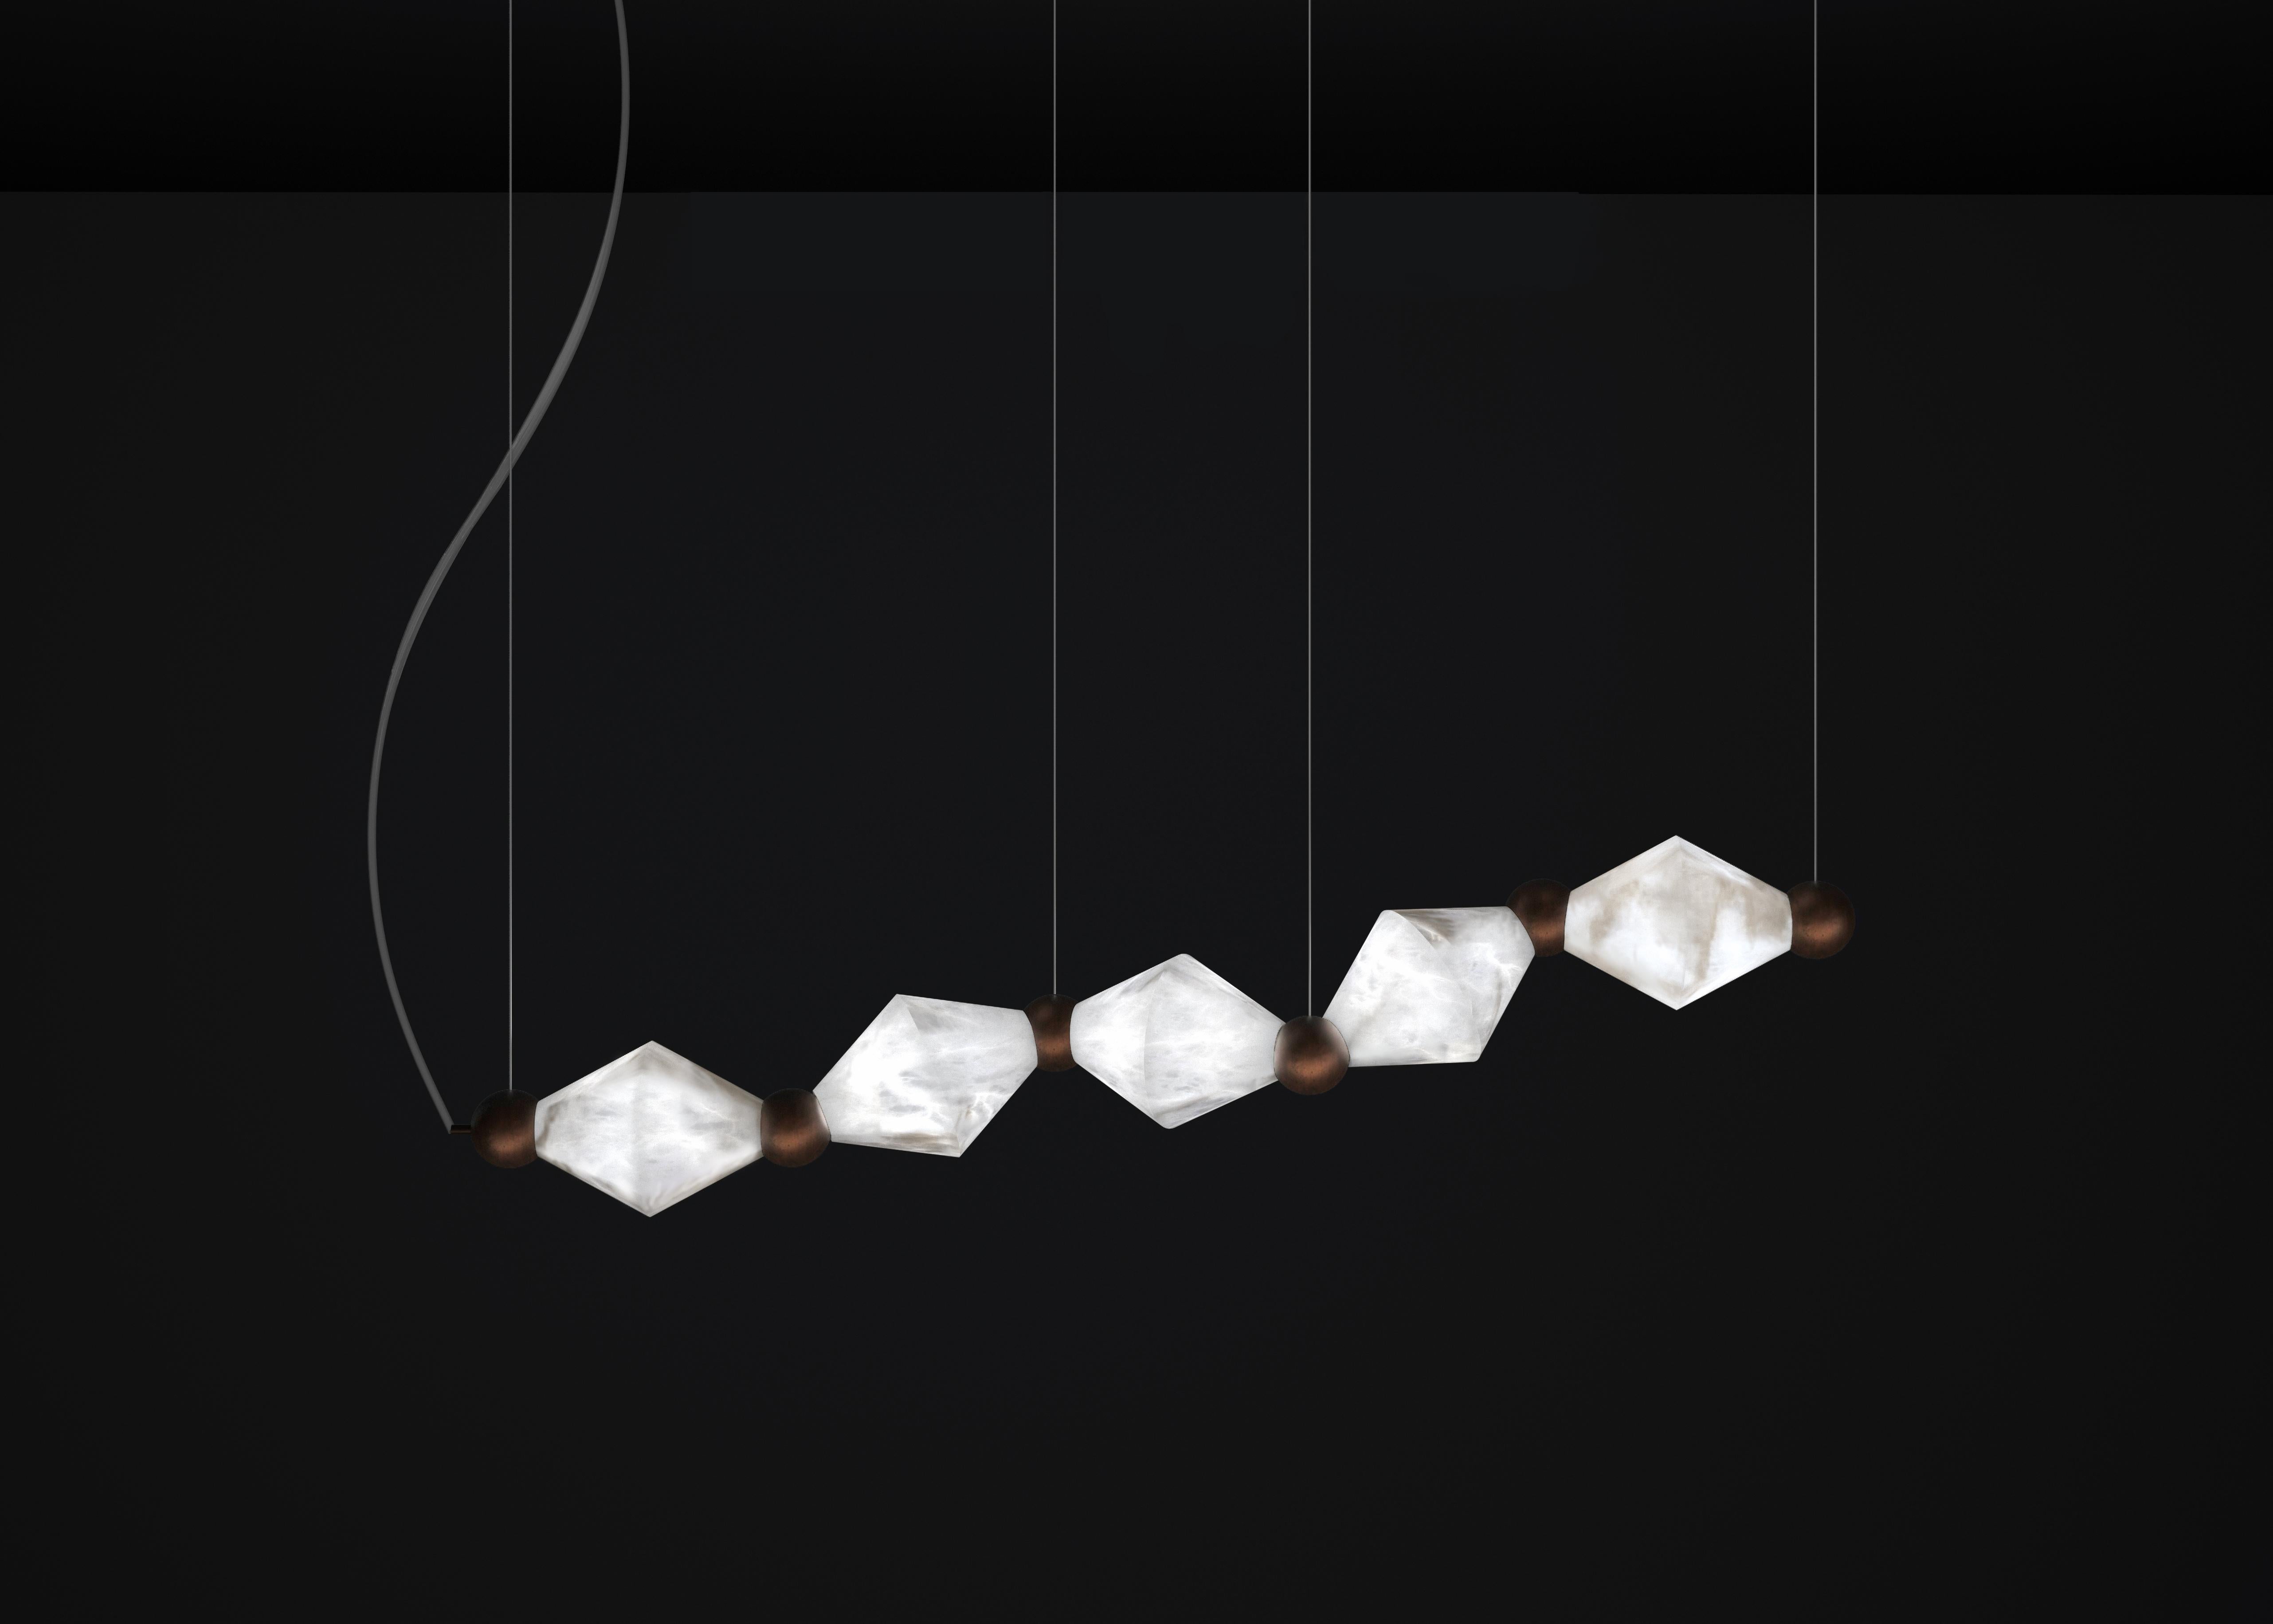 Chronos Ruggine Of Florence Metal Pendant Lamp by Alabastro Italiano
Dimensions: D 21 x W 142 x H 31 cm.
Materials: White alabaster and metal.

Available in different finishes: Shiny Silver, Bronze, Brushed Brass, Ruggine of Florence, Brushed